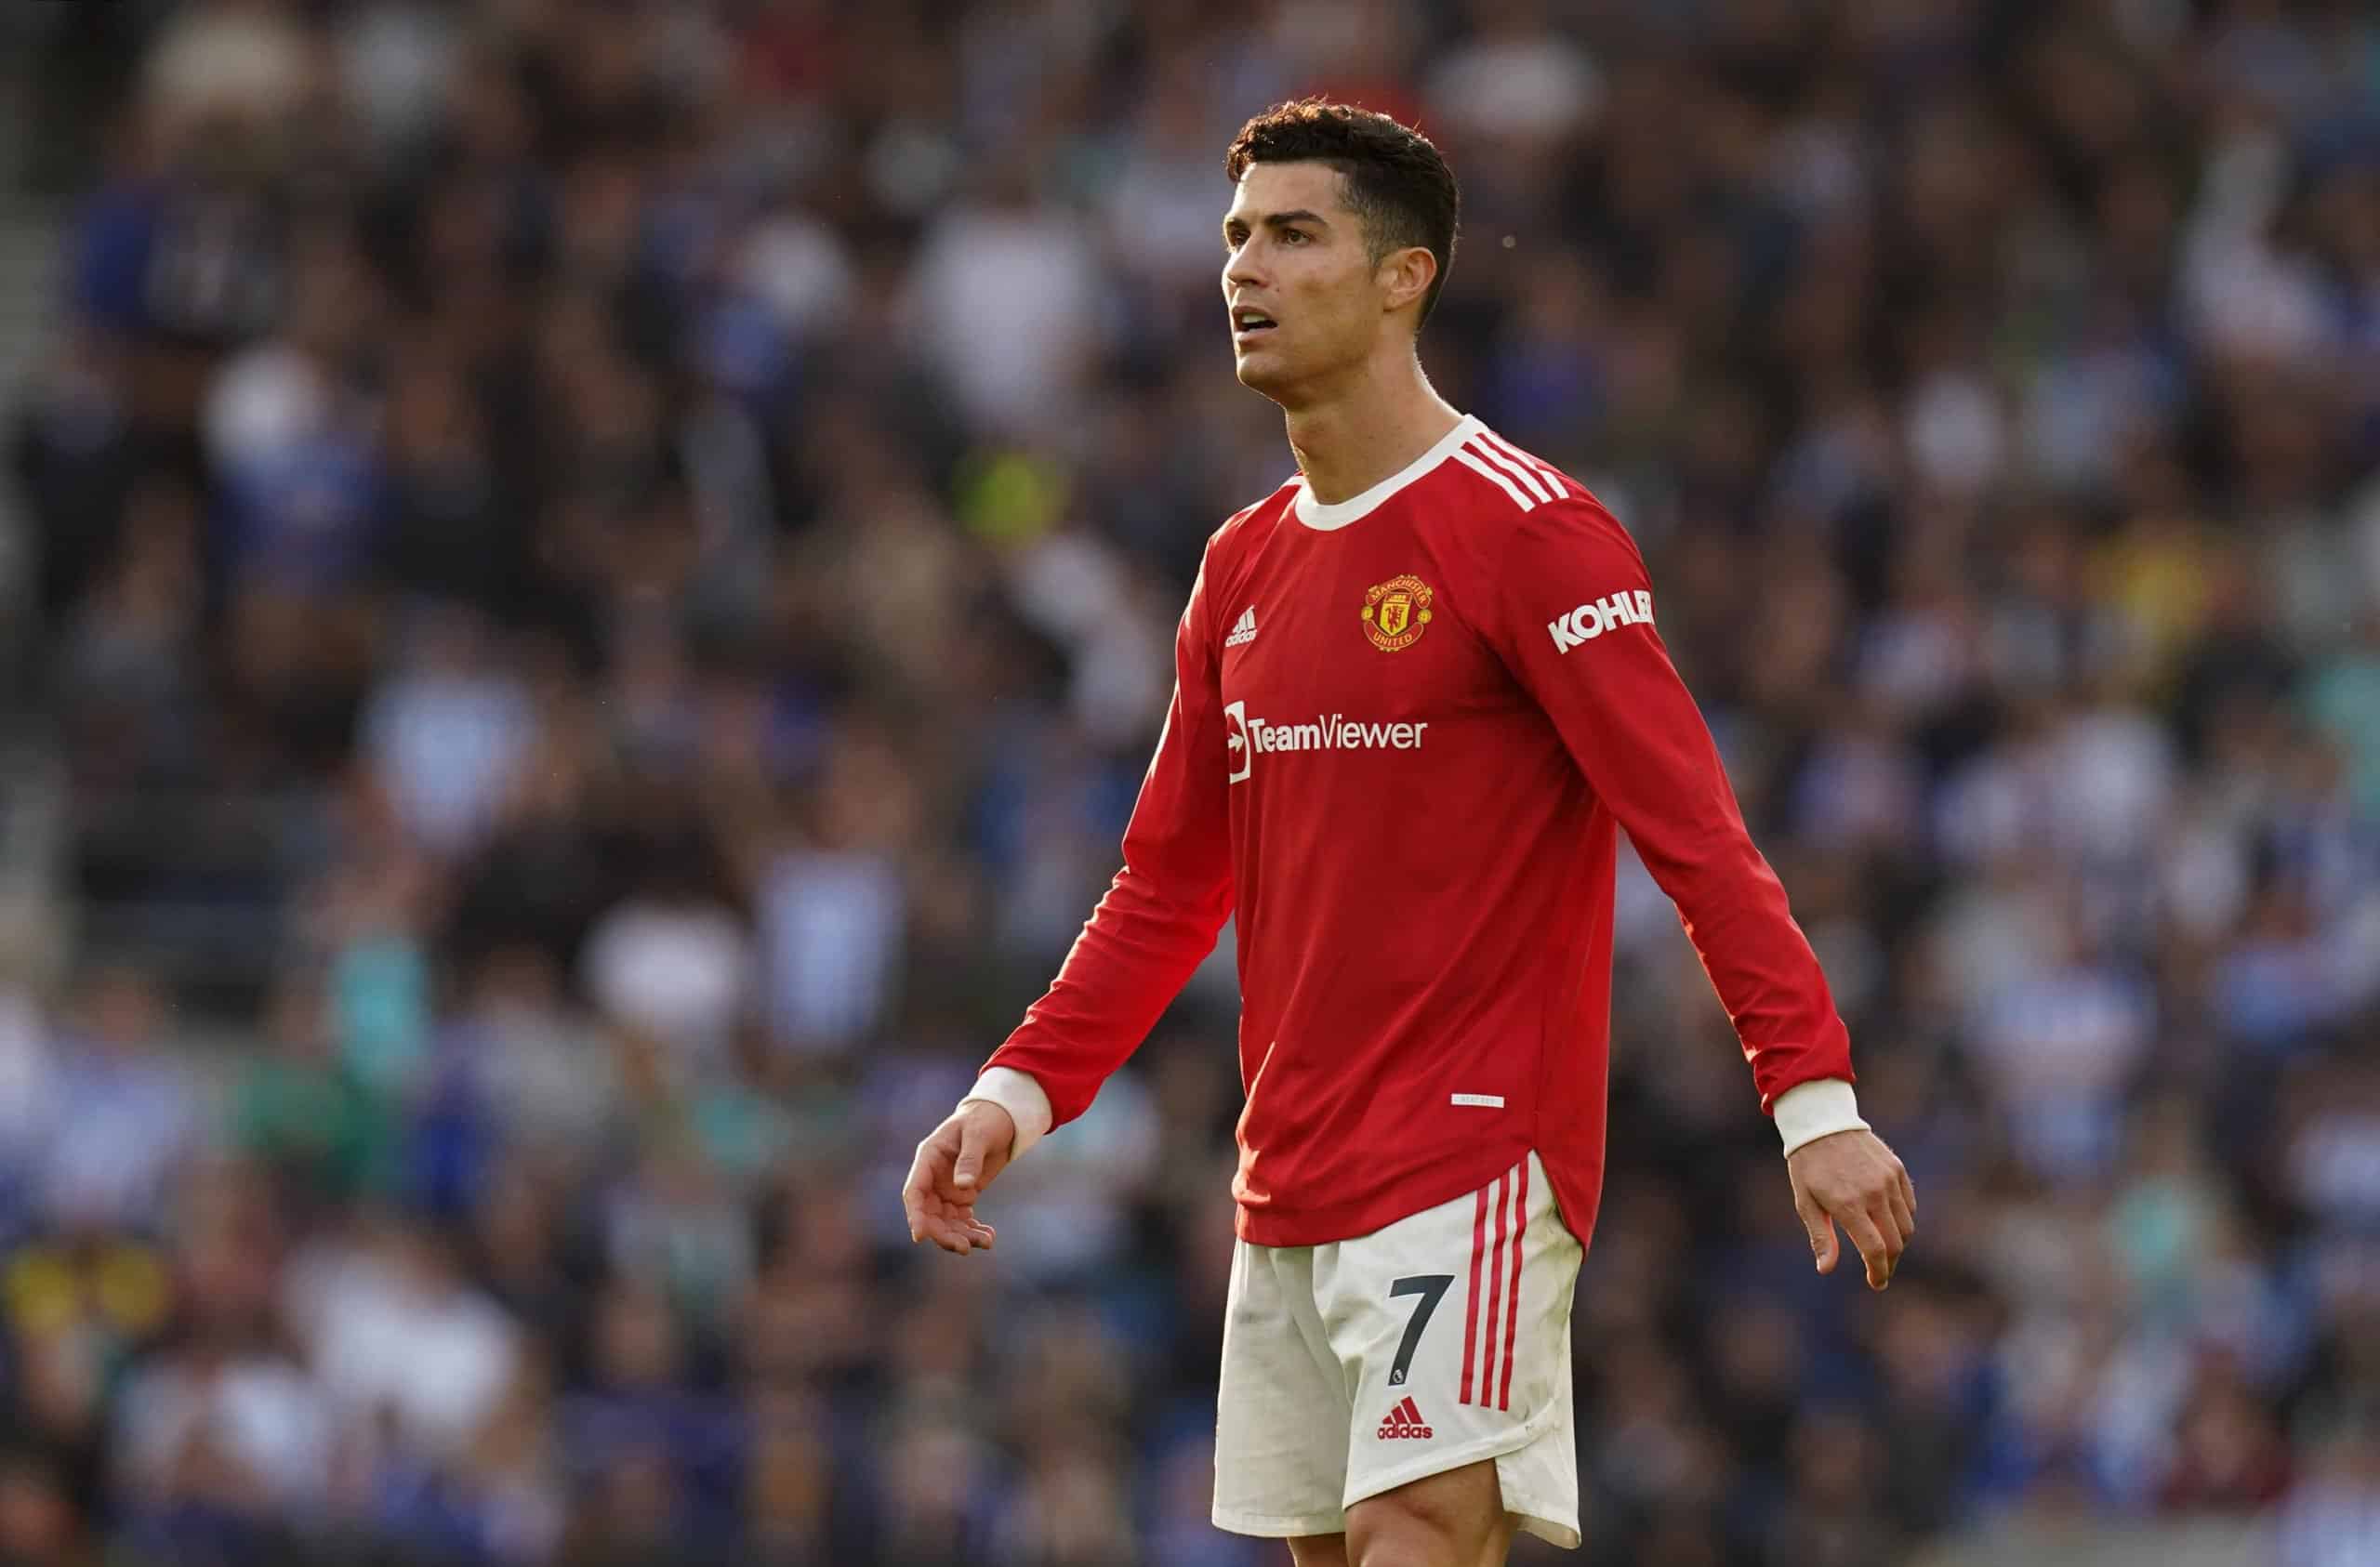 Watch: Manchester United players hug benched Ronaldo as they beat Southampton